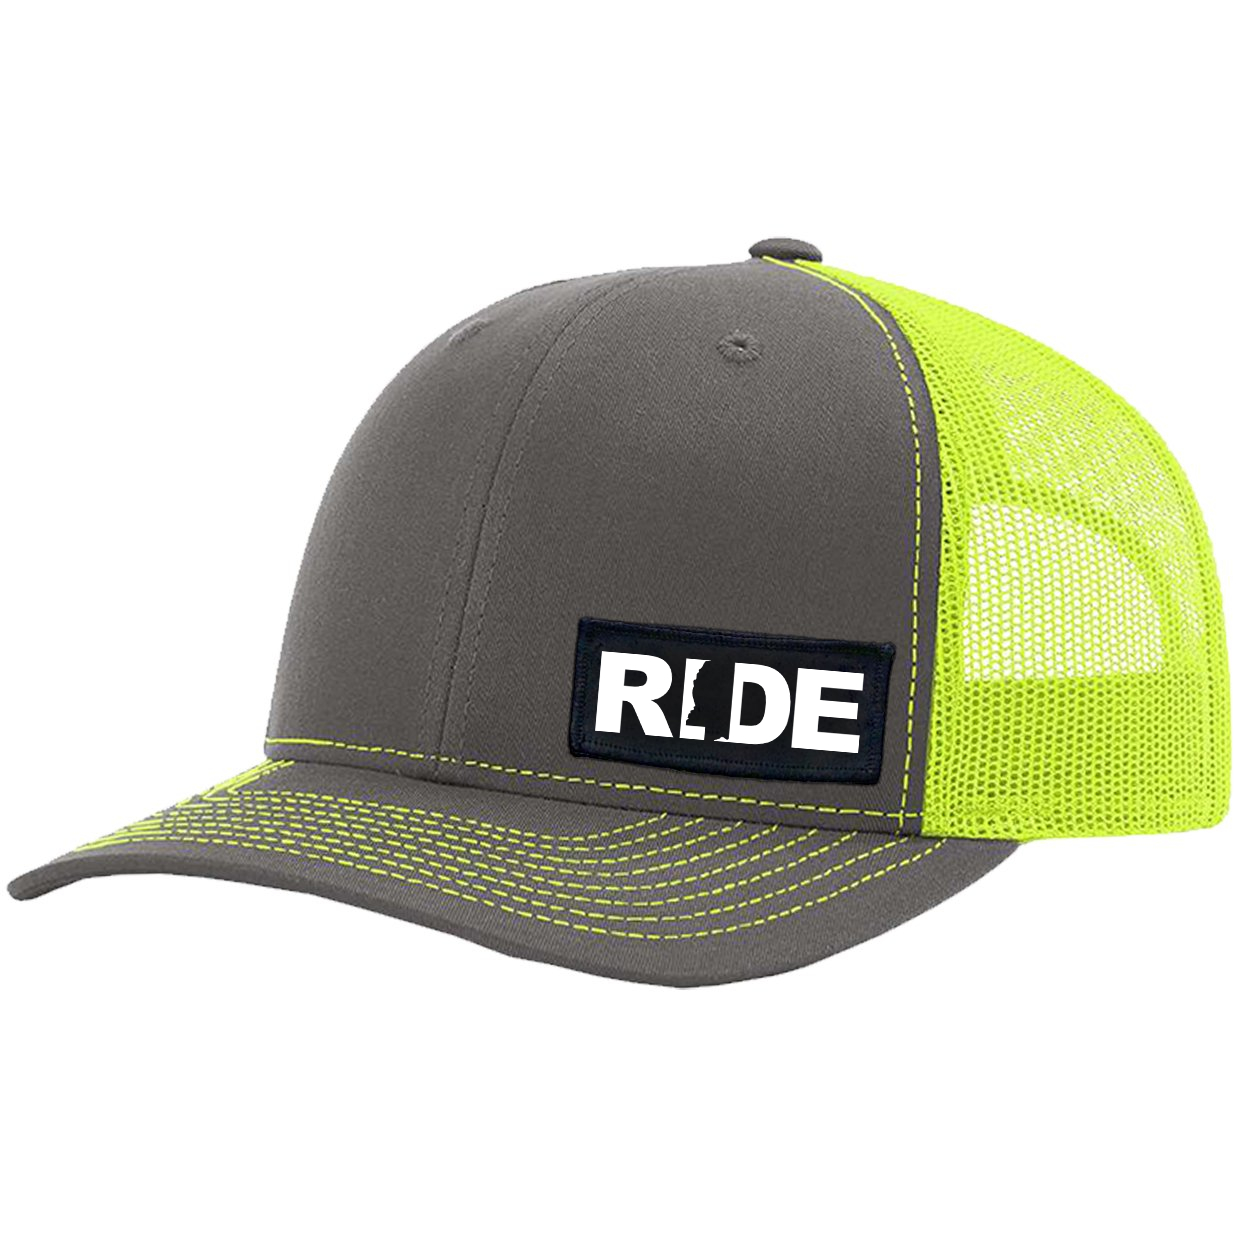 Ride Mississippi Night Out Woven Patch Snapback Trucker Hat Charcoal/Neon Yellow (White Logo)